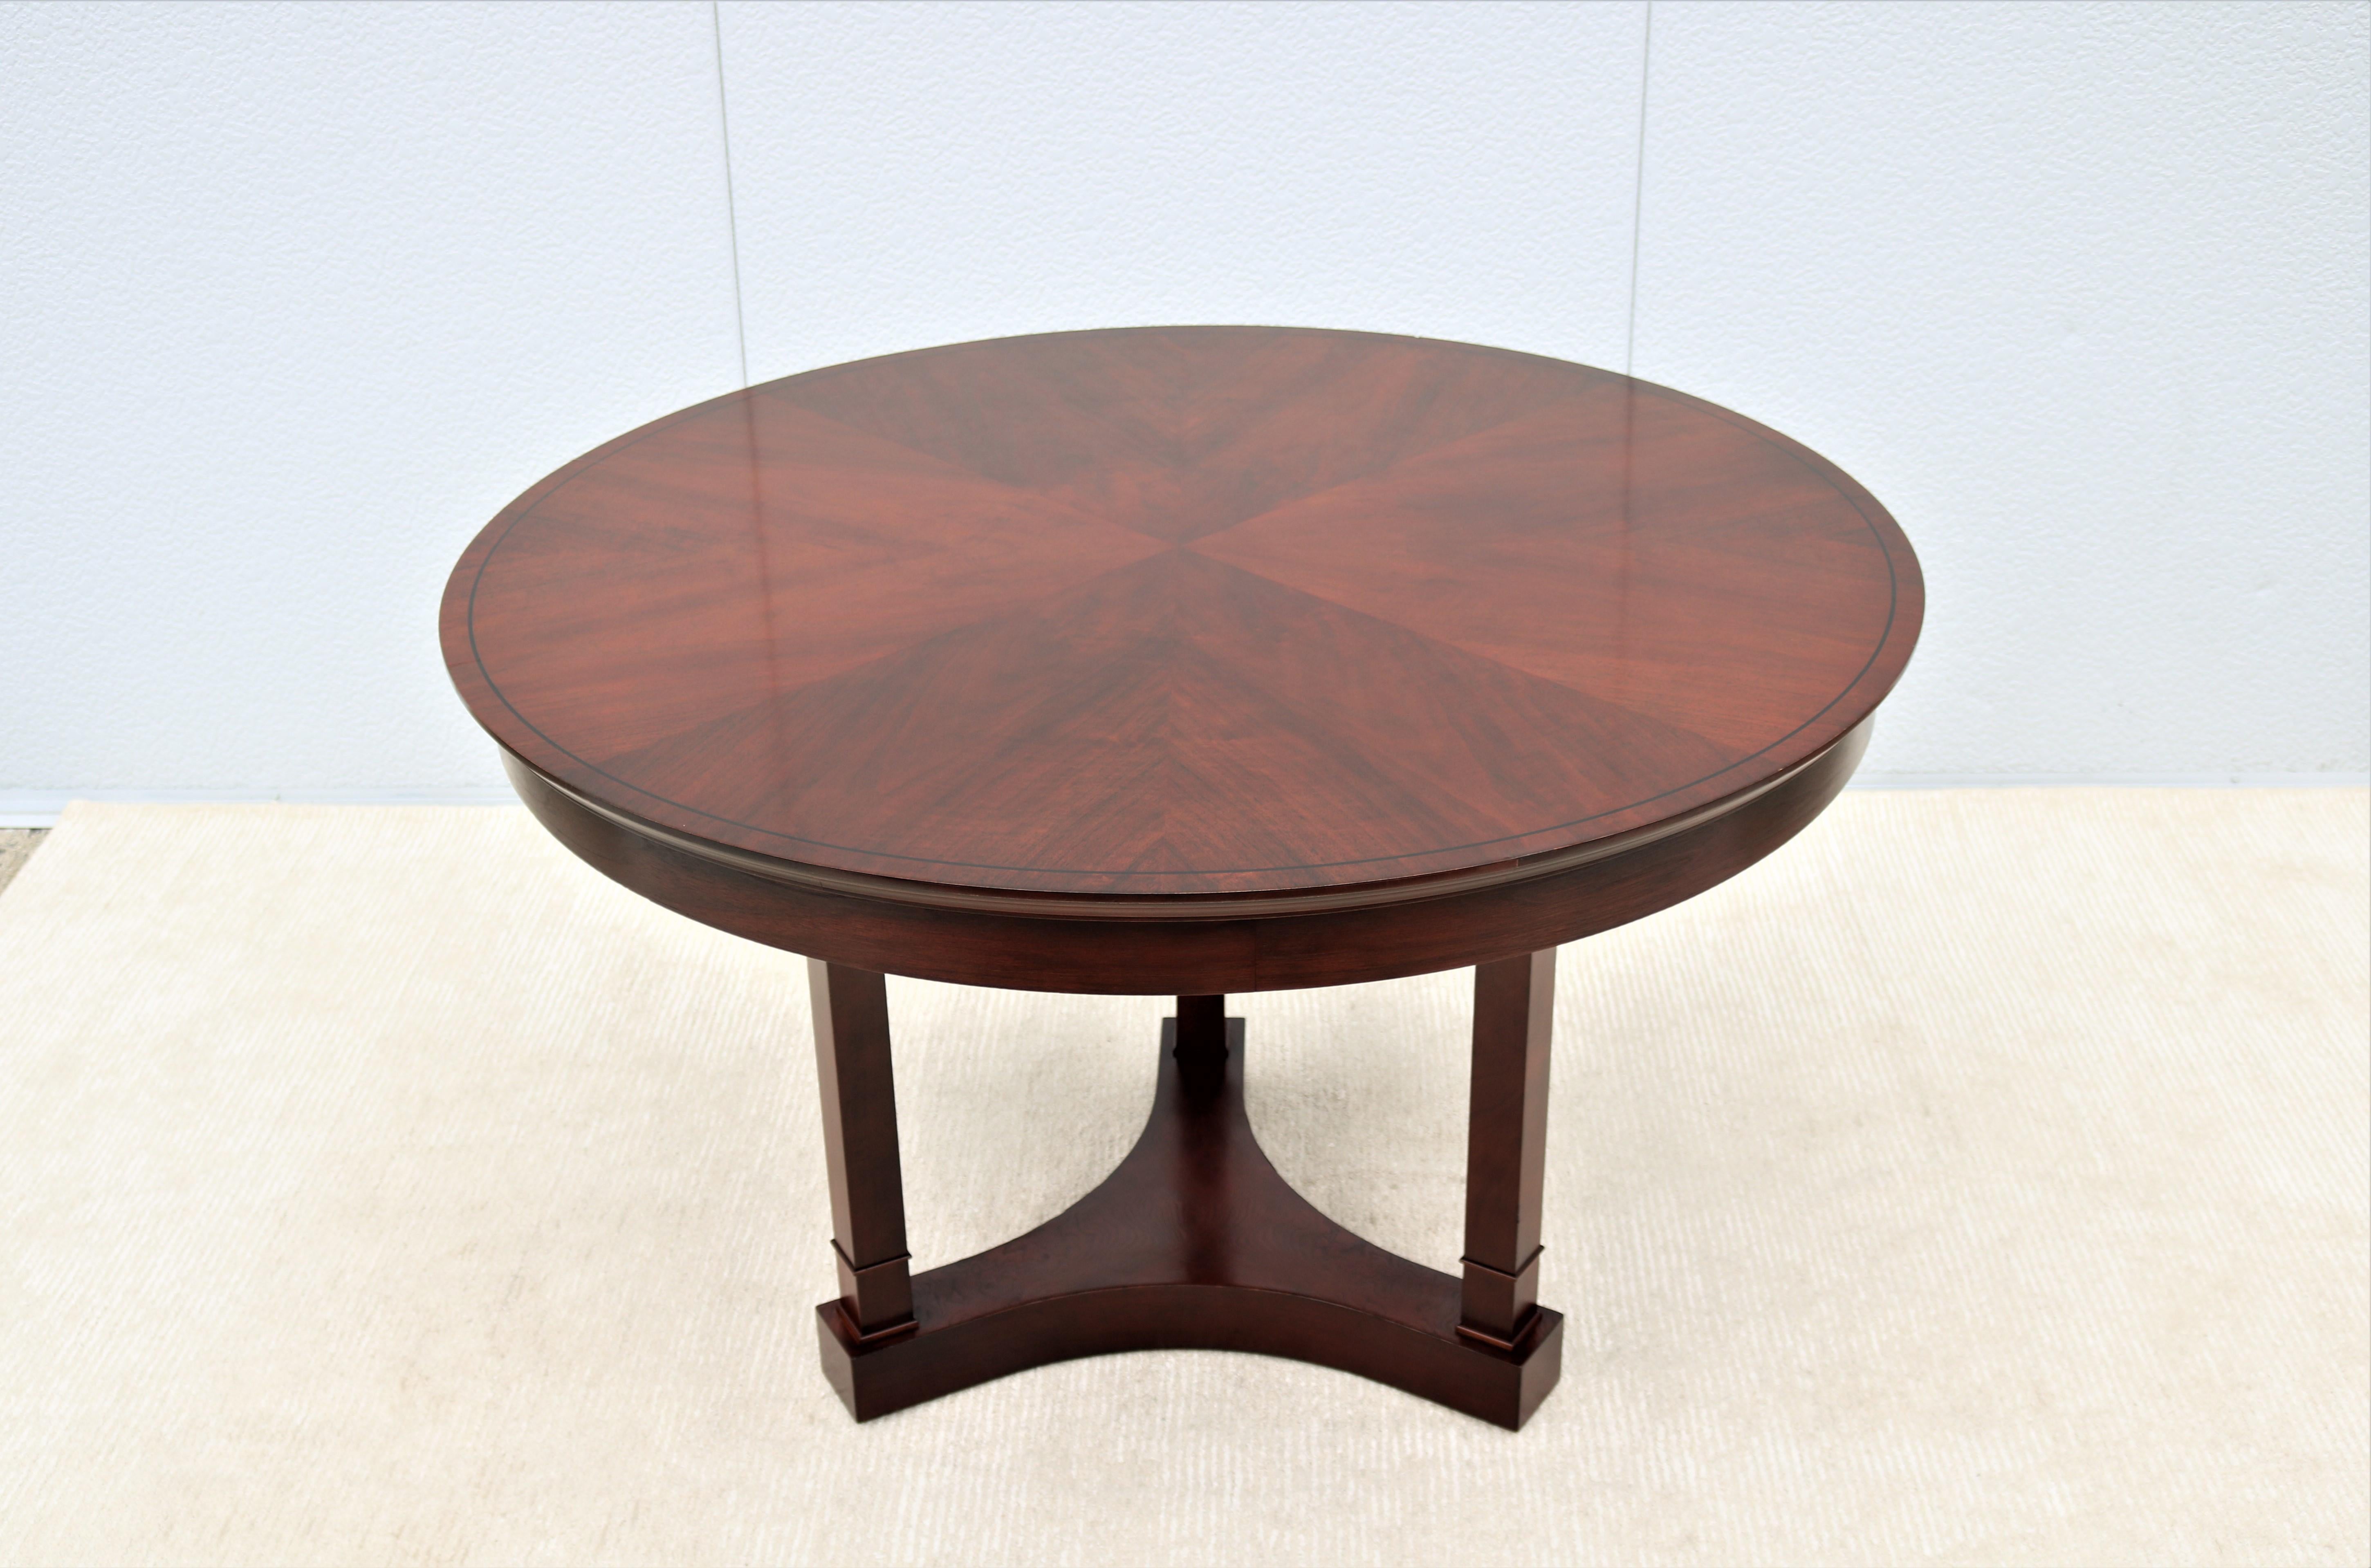 Fabulous Innsbruck and Osterley Park round cherry veneer dining or conference table.
The strength and character of 19th century elegant Biedermeier neo-classic style finds renewed expression in Innsbruck and Osterley Park. 
Michael Tatum and